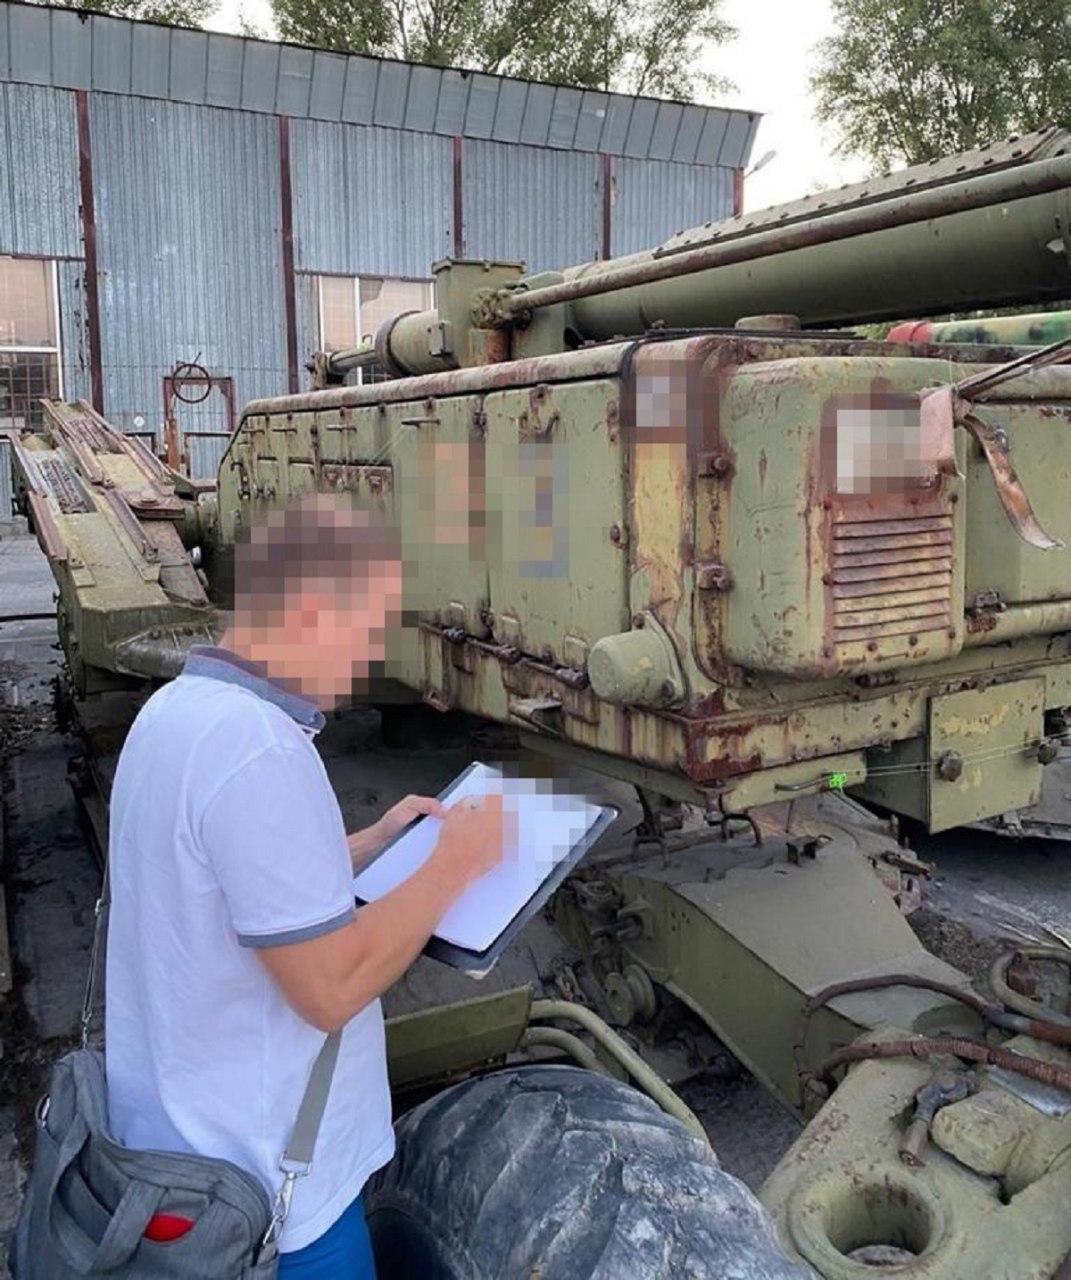 Ukraine - Land Of Opportunities: Selling Smuggled Soviet Air Defense Systems, Own Sovereignty And More